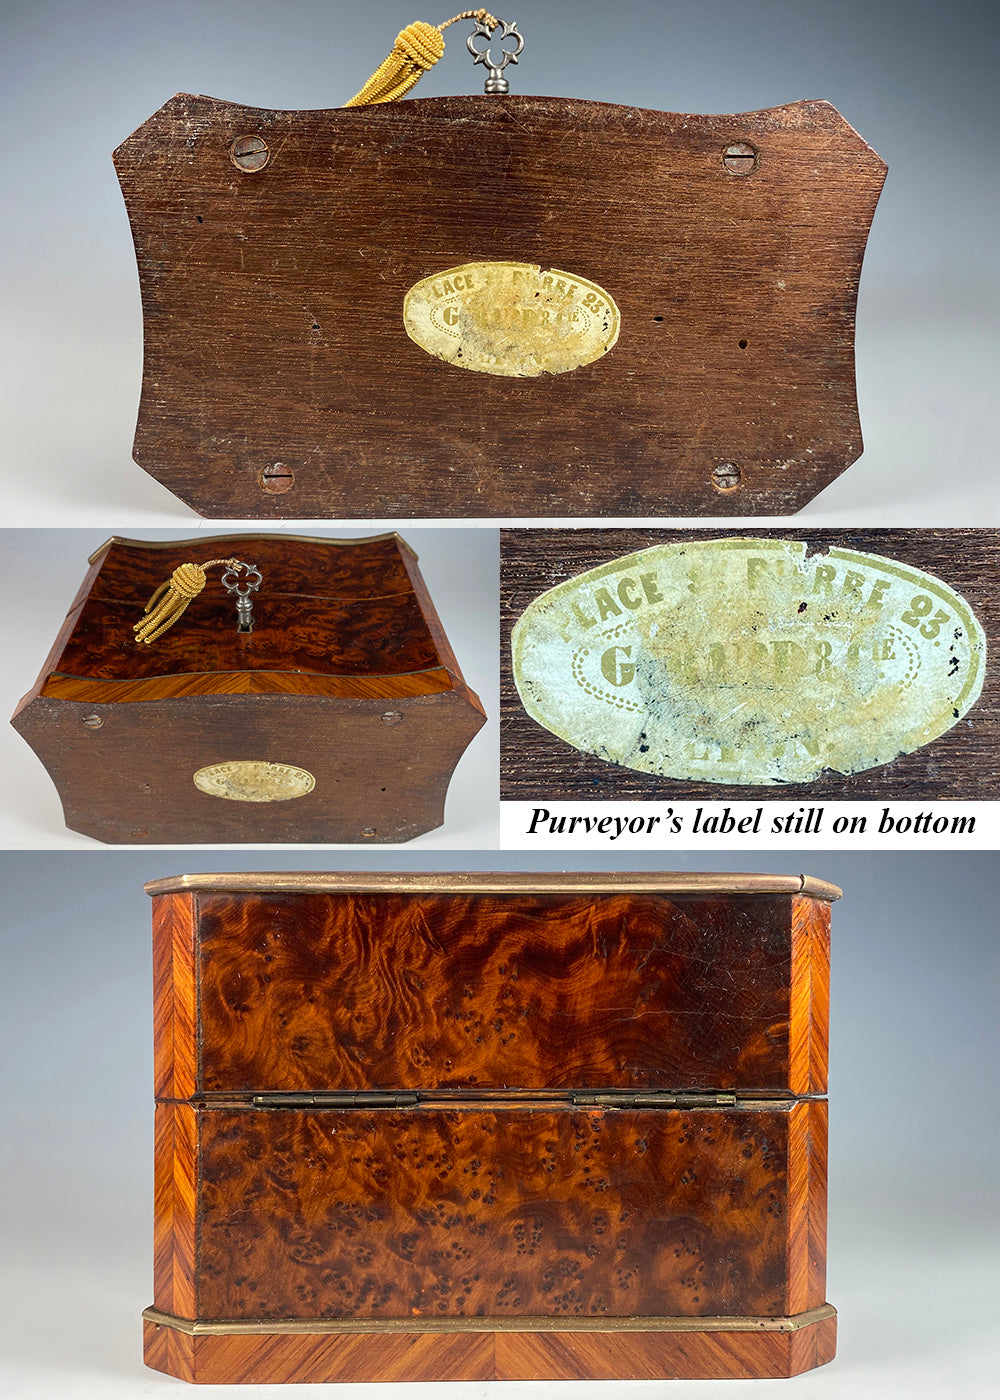 Antique French Kingwood and Burl Scent Caddy, 3 Original White Opaline Perfume Bottles